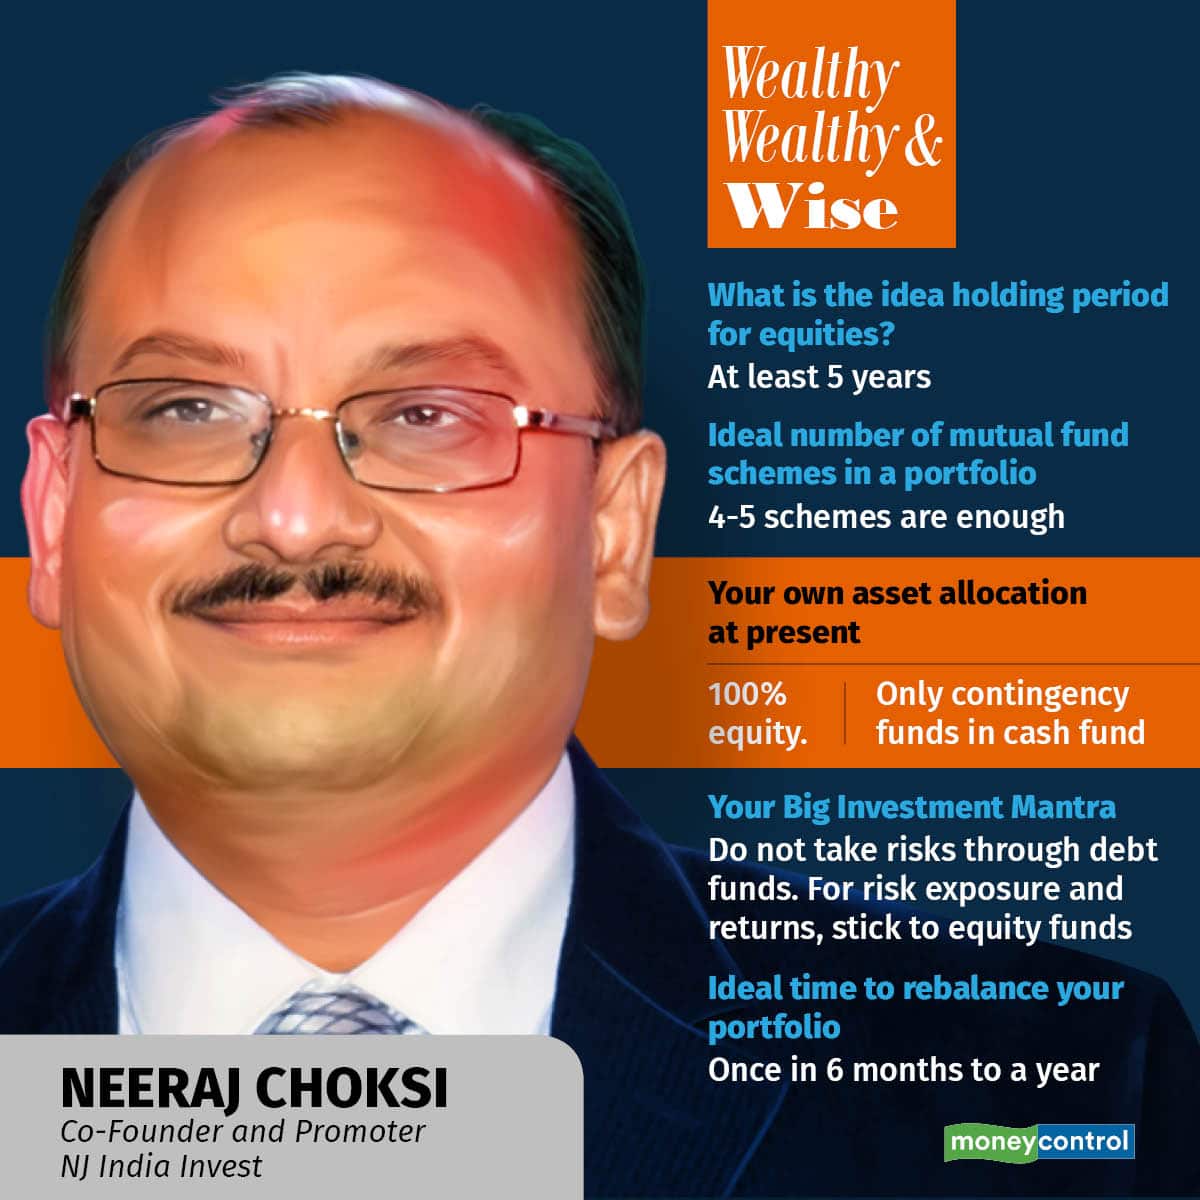 Neeraj Choksi believes in taking risks through equity funds, and not debt funds